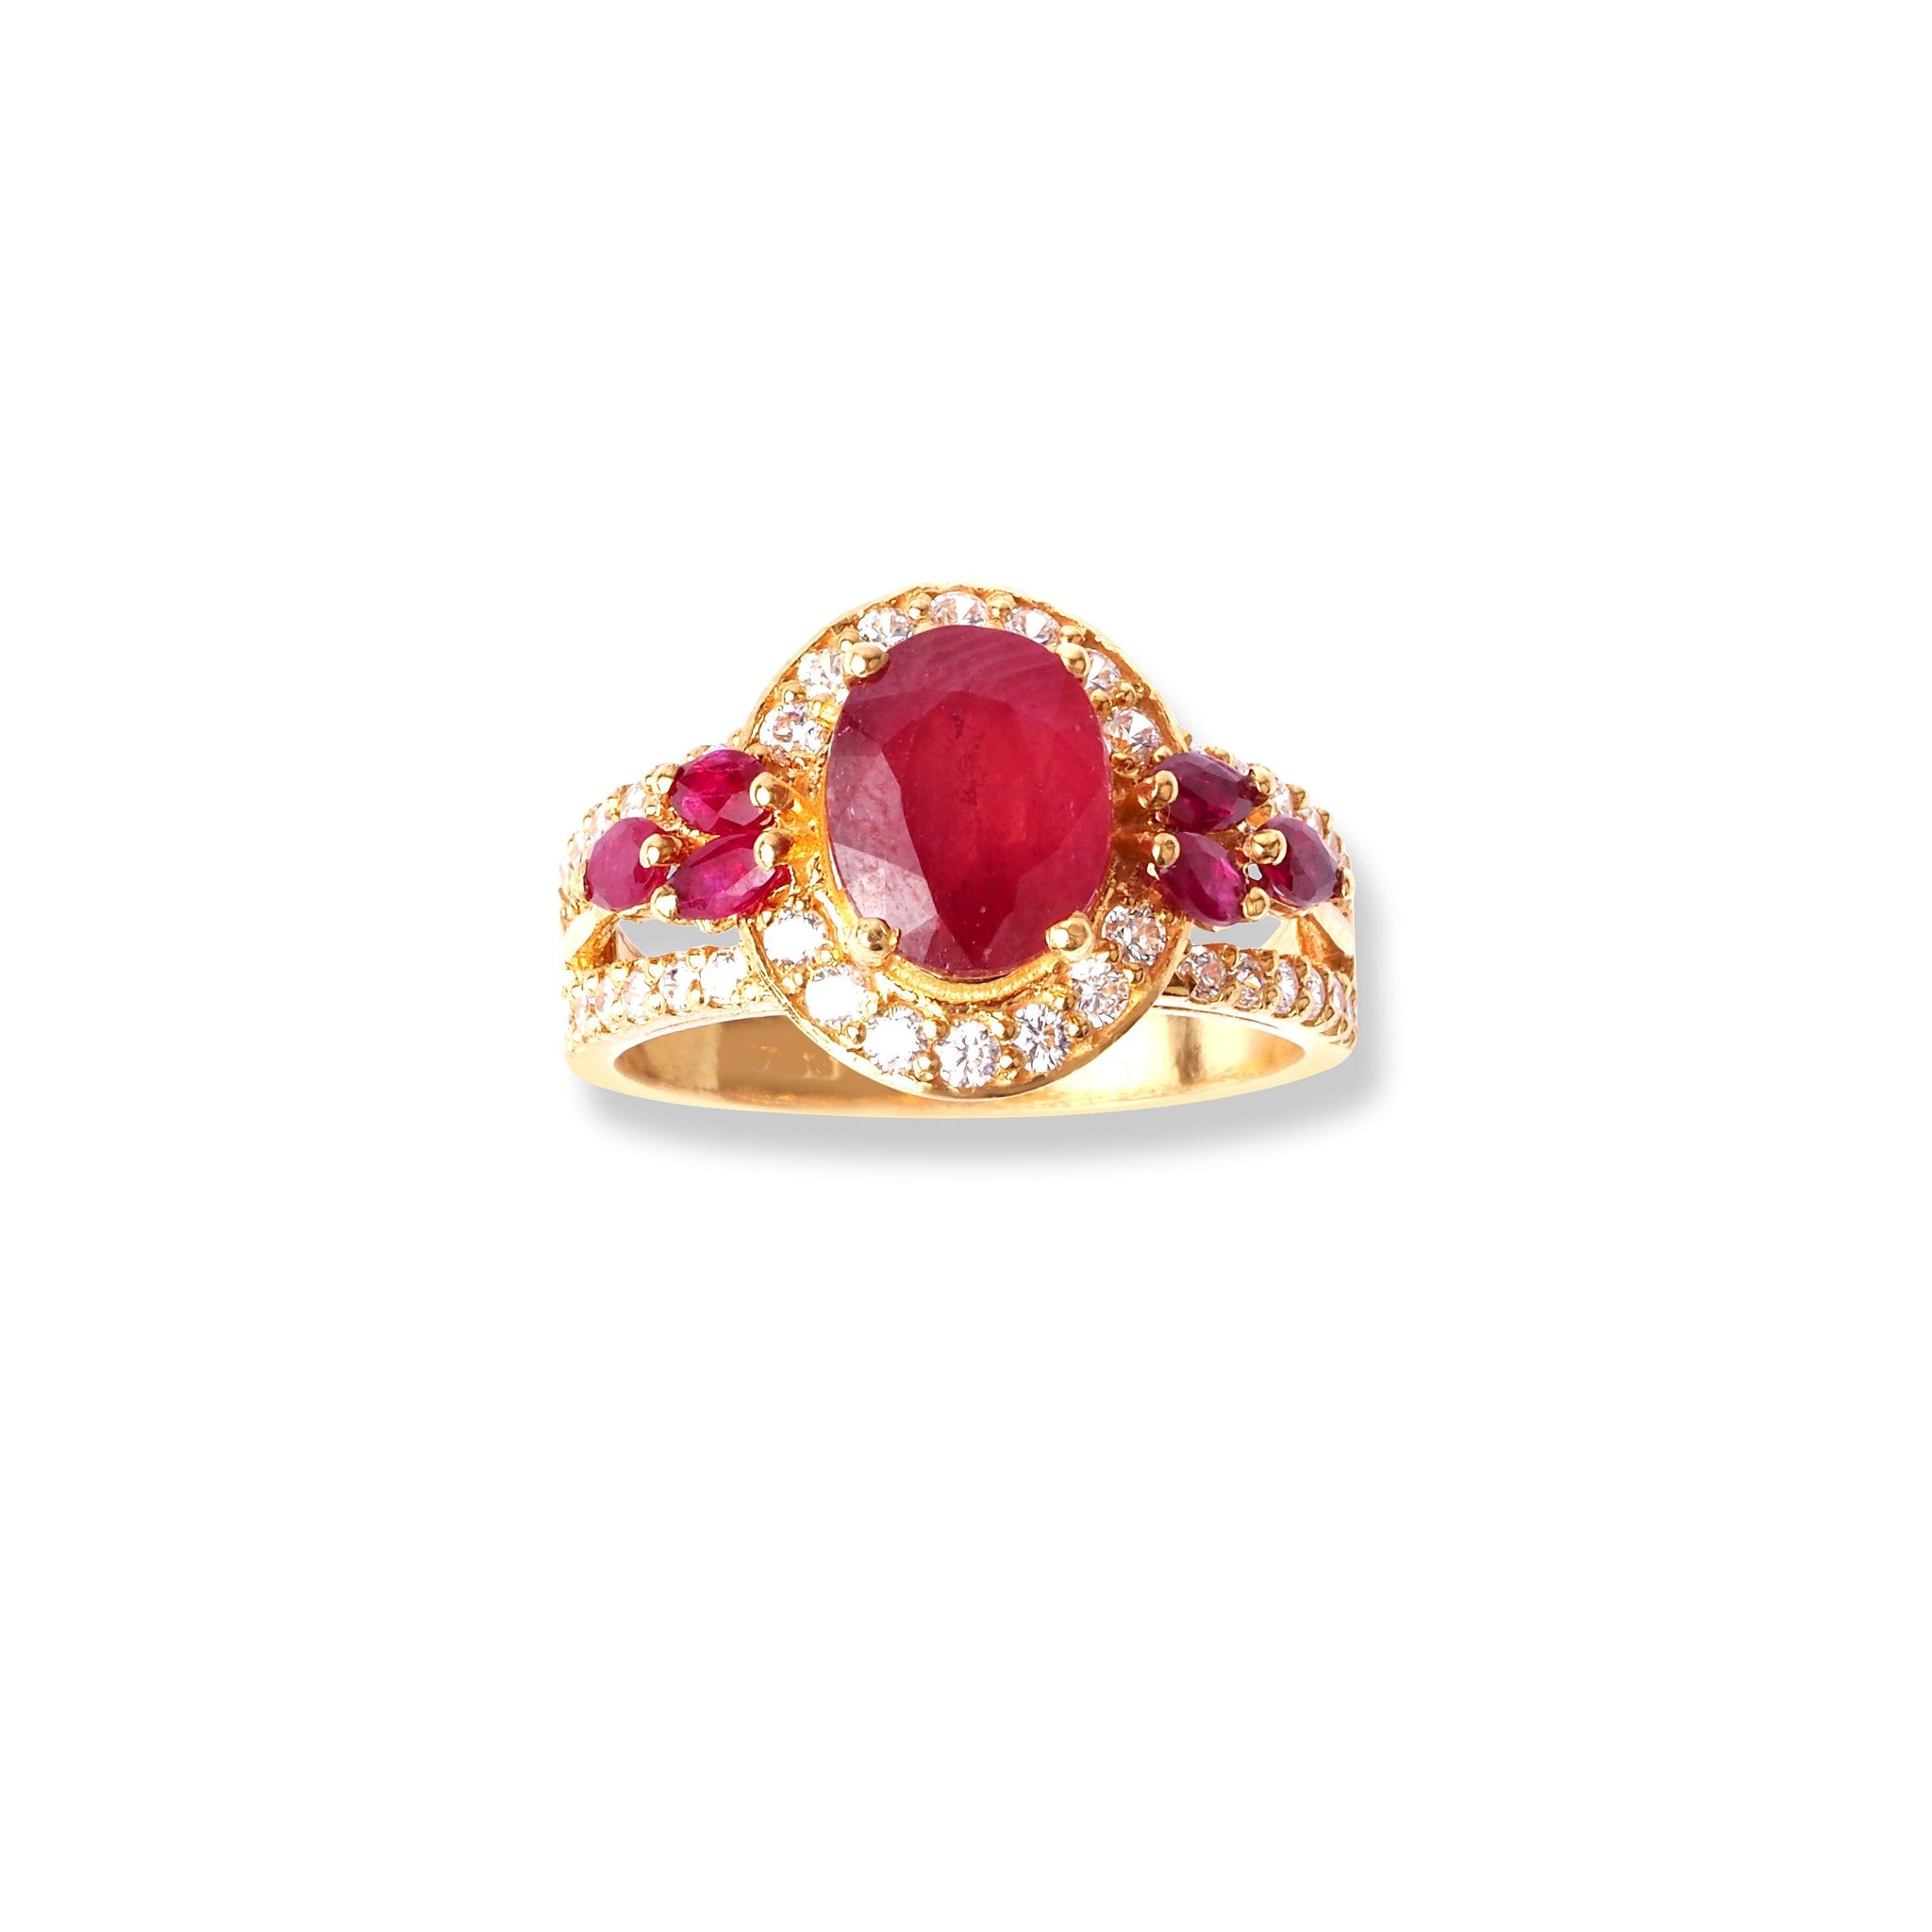 22ct Gold Ring With Red Stones & Cubic Zirconia Stones (6.5g) LR-6595